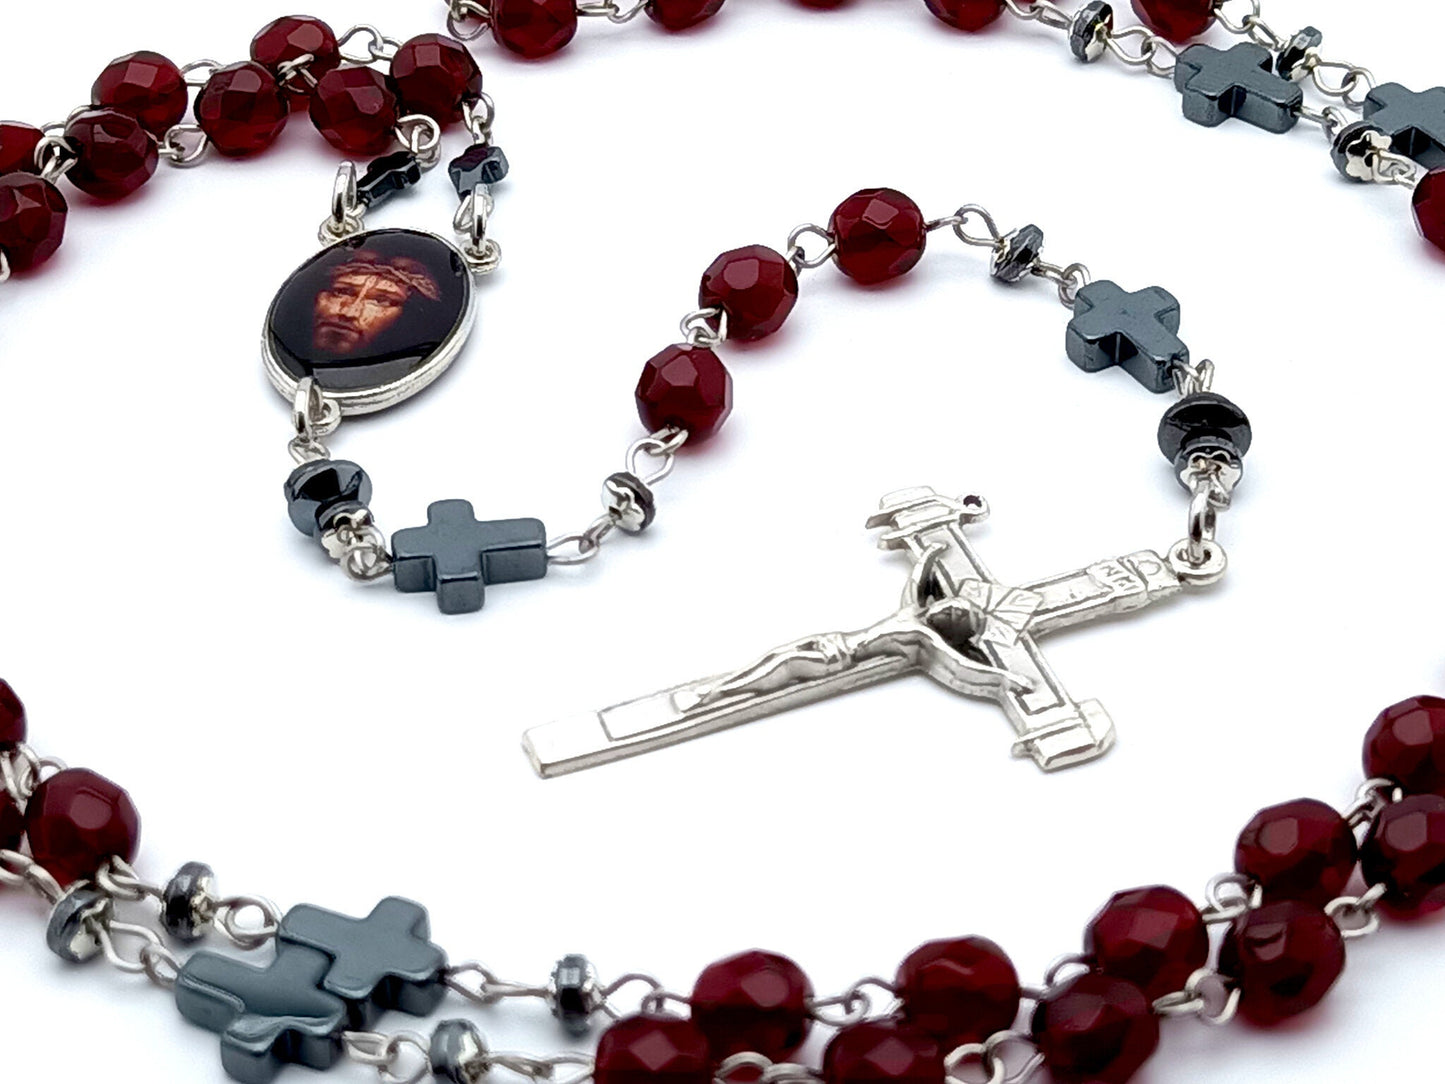 The Passion of Christ unique rosary beads with deep red glass faceted beads, hemitite pater beads, silver La Salette crucifix and picture centre medal.